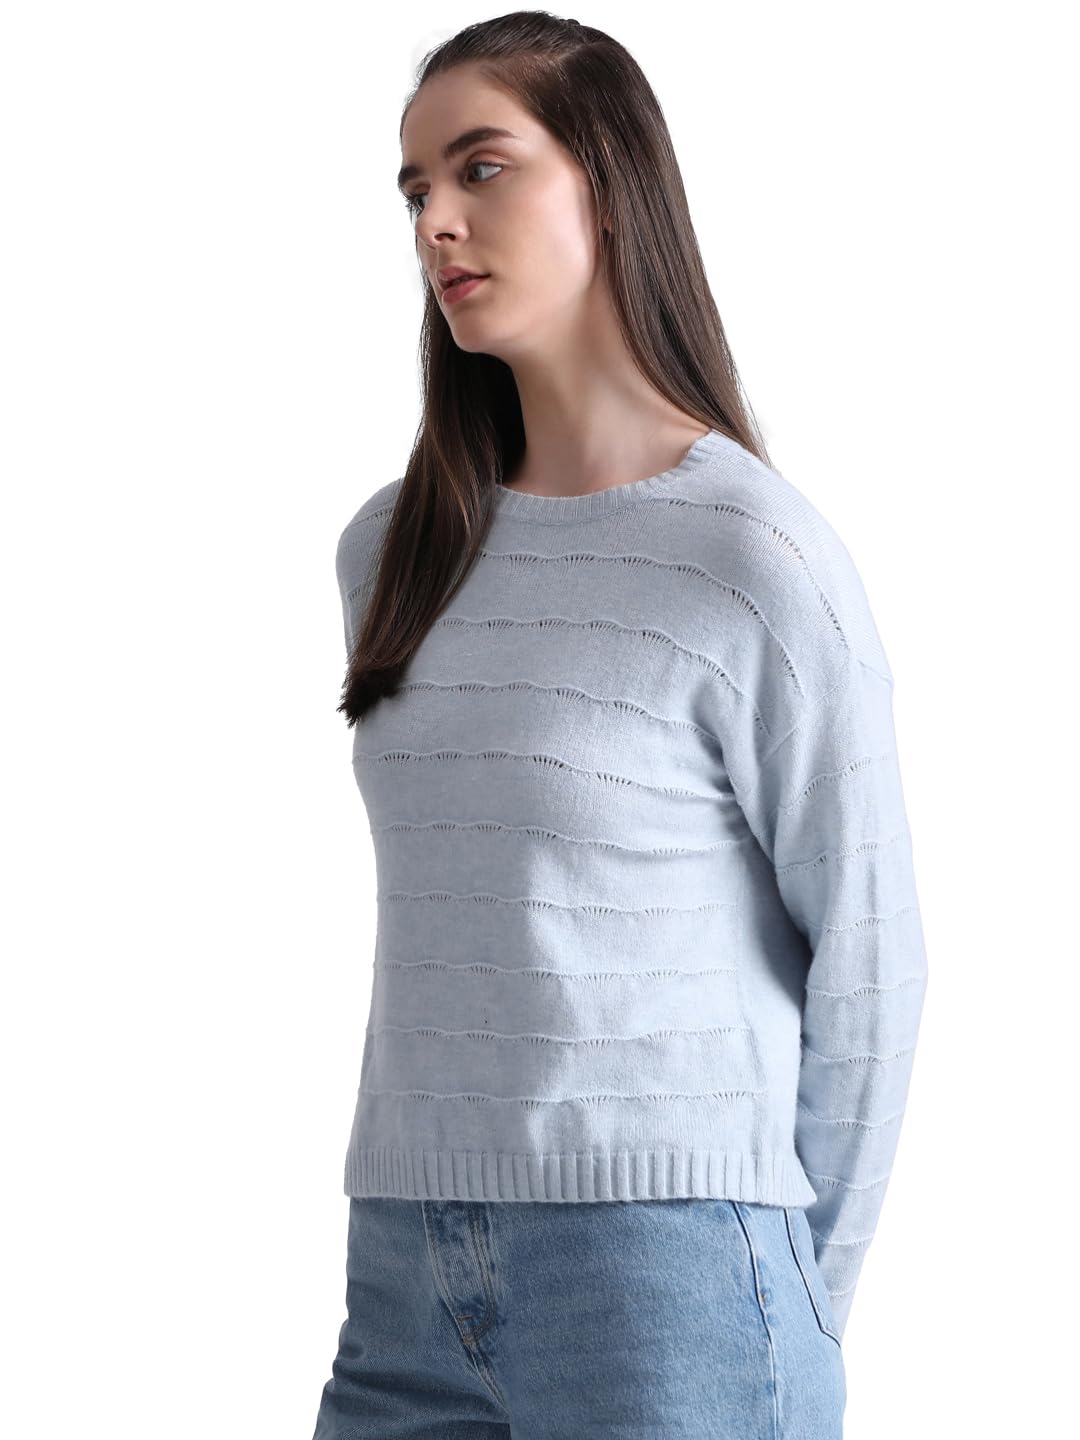 Only Women's Viscose Blend Round Neck Blue Sweater_Large